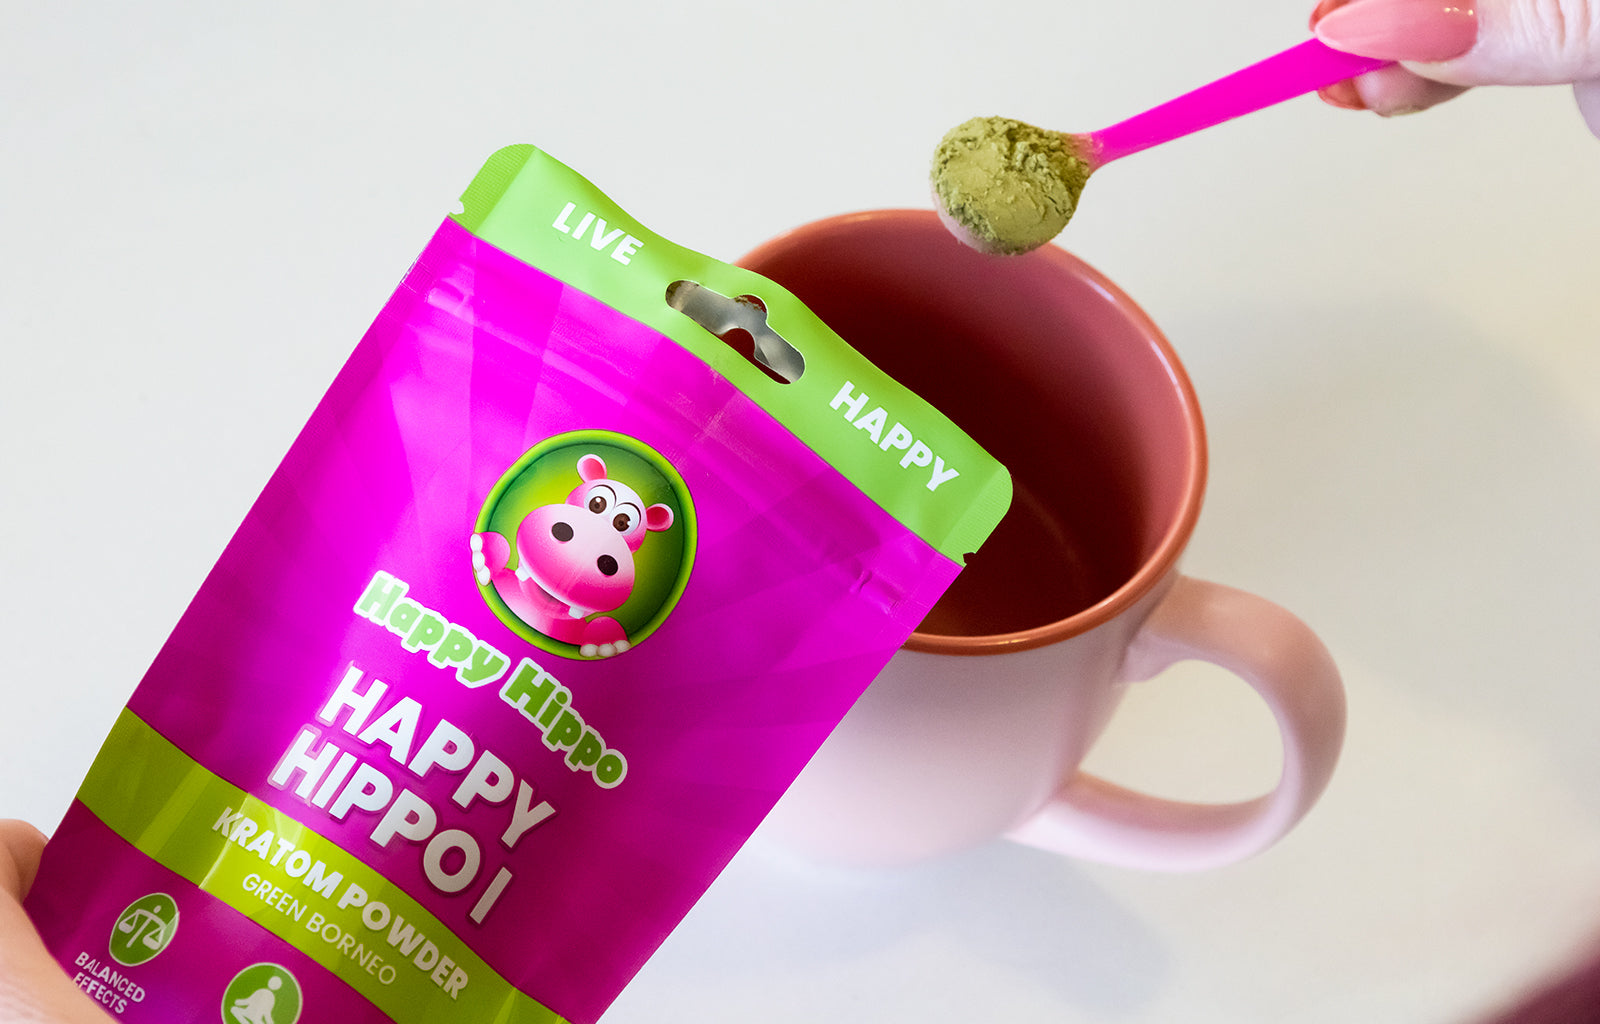 Photographic image depicting a pink coffee cup, over which someone is using a little pink measuring scoop adding Happy Hippo brand kratom powder to their morning tea.